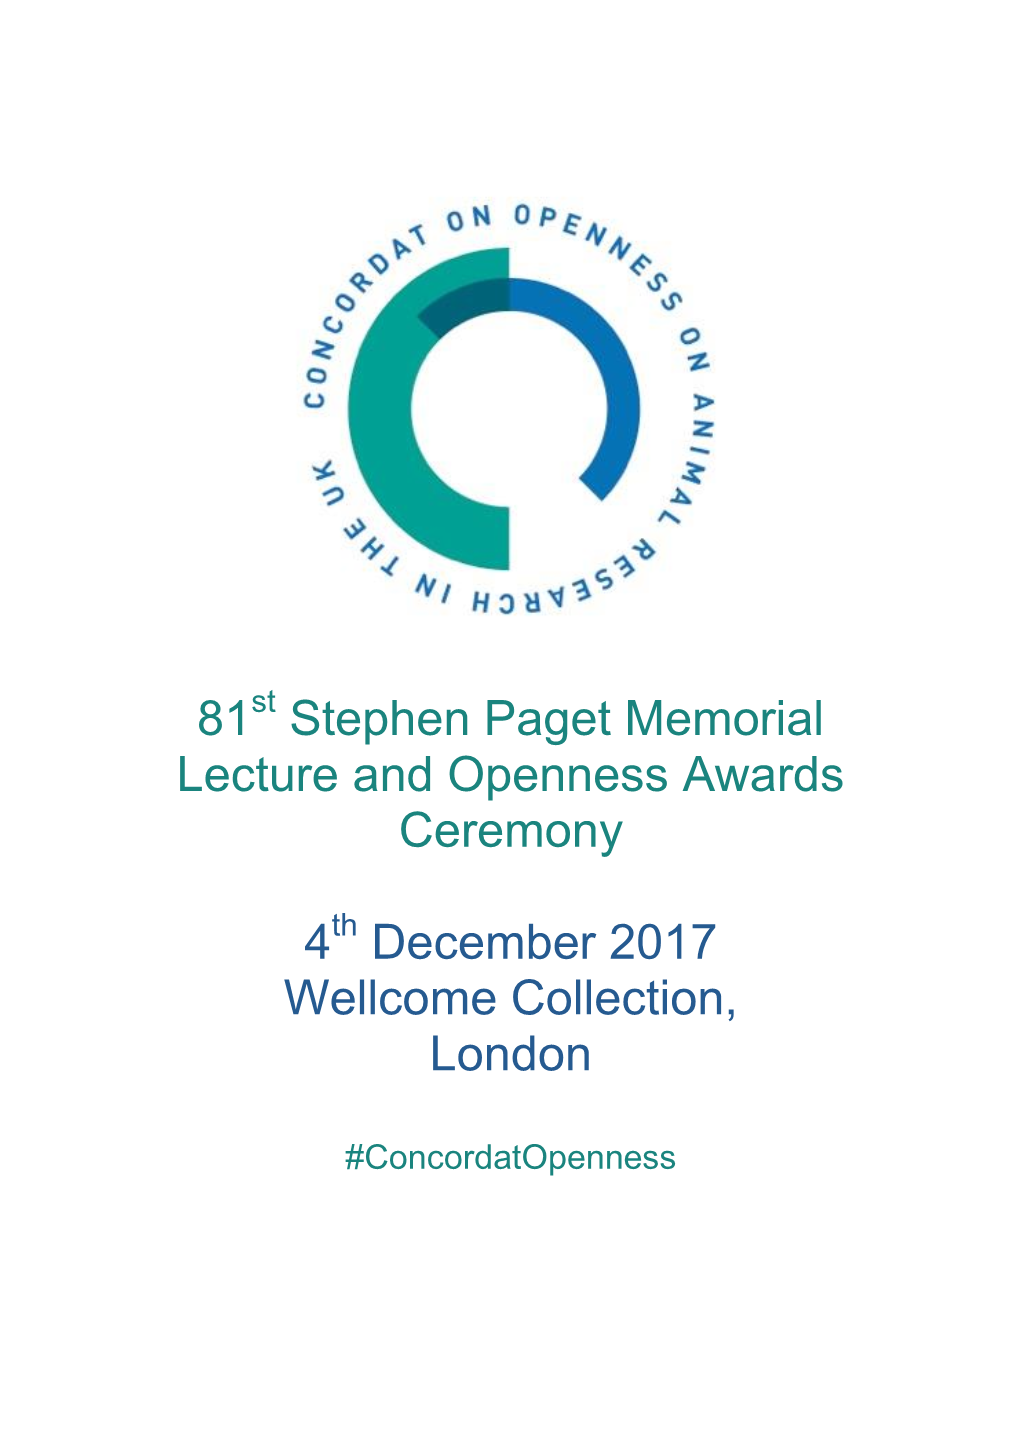 81 Stephen Paget Memorial Lecture and Openness Awards Ceremony 4